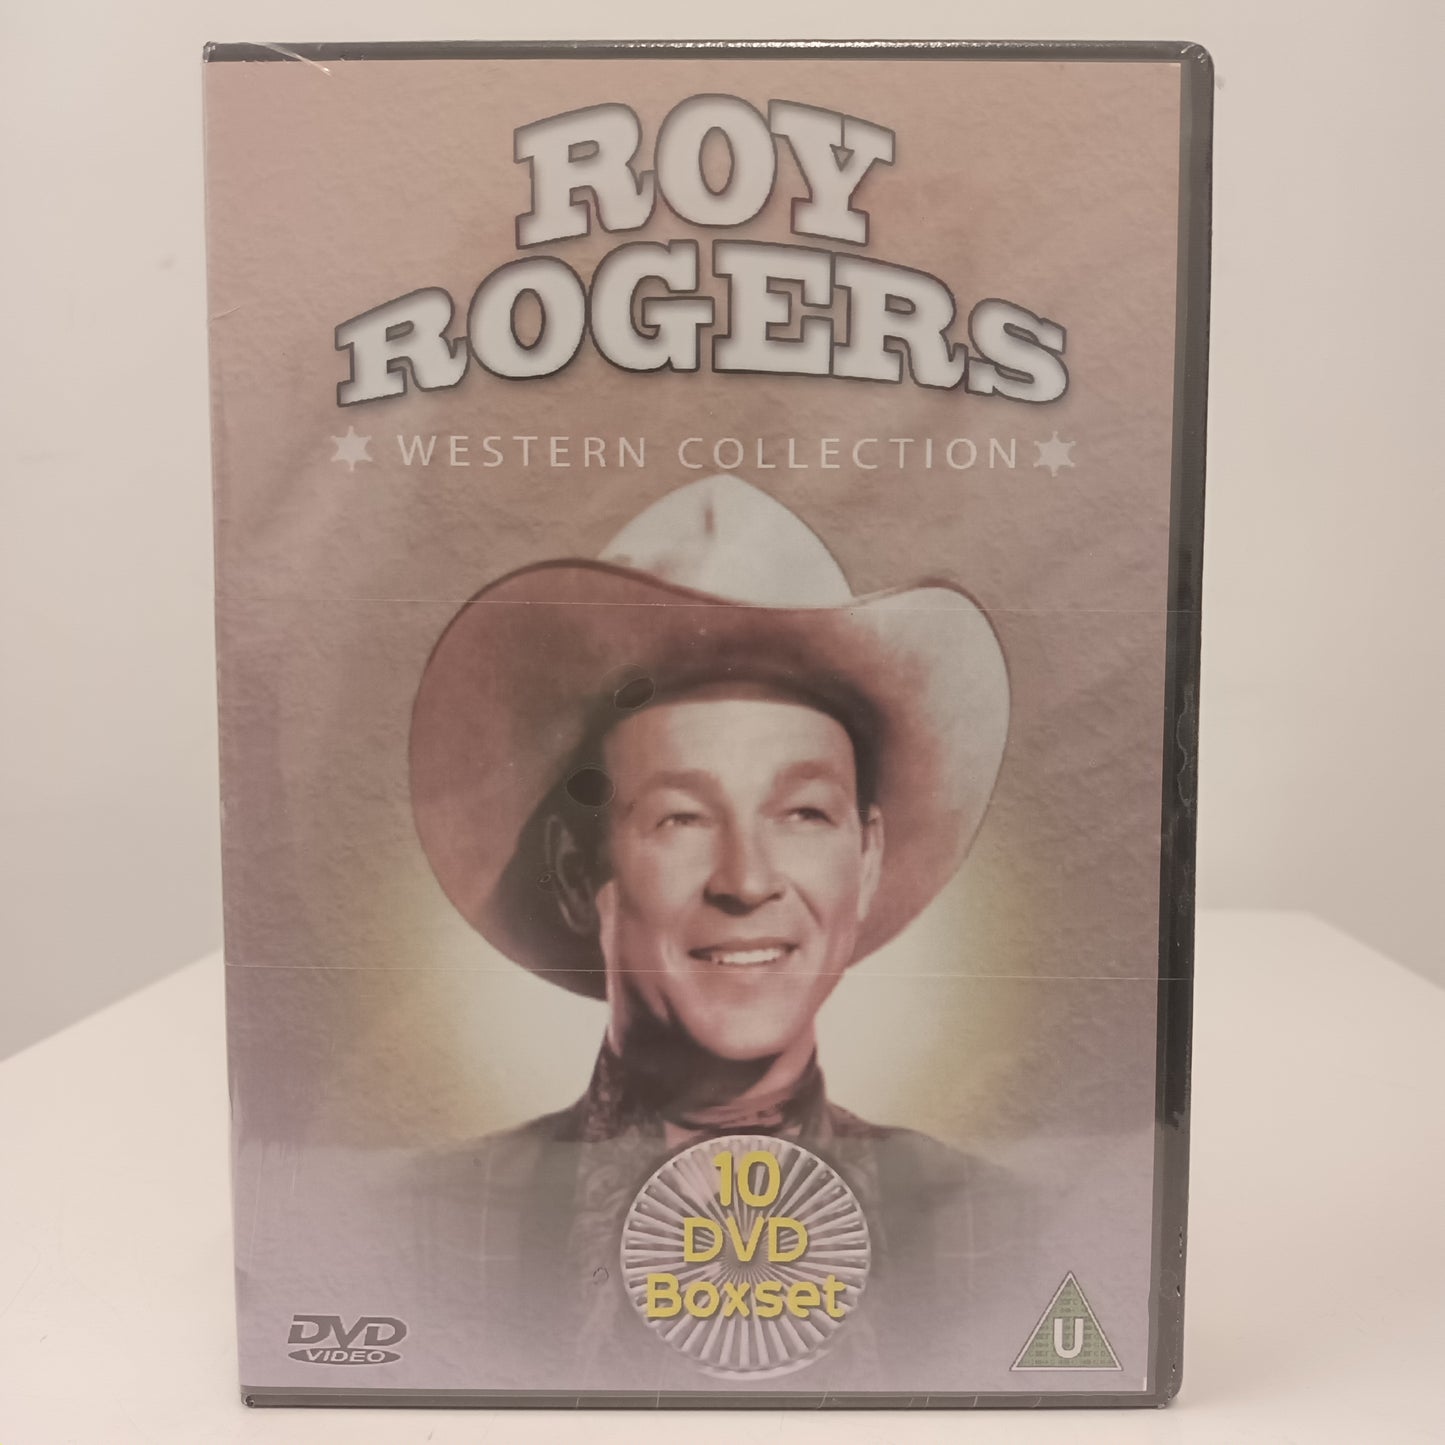 New Factory Sealed Roy Rogers Western Collection 10 DVD Boxset